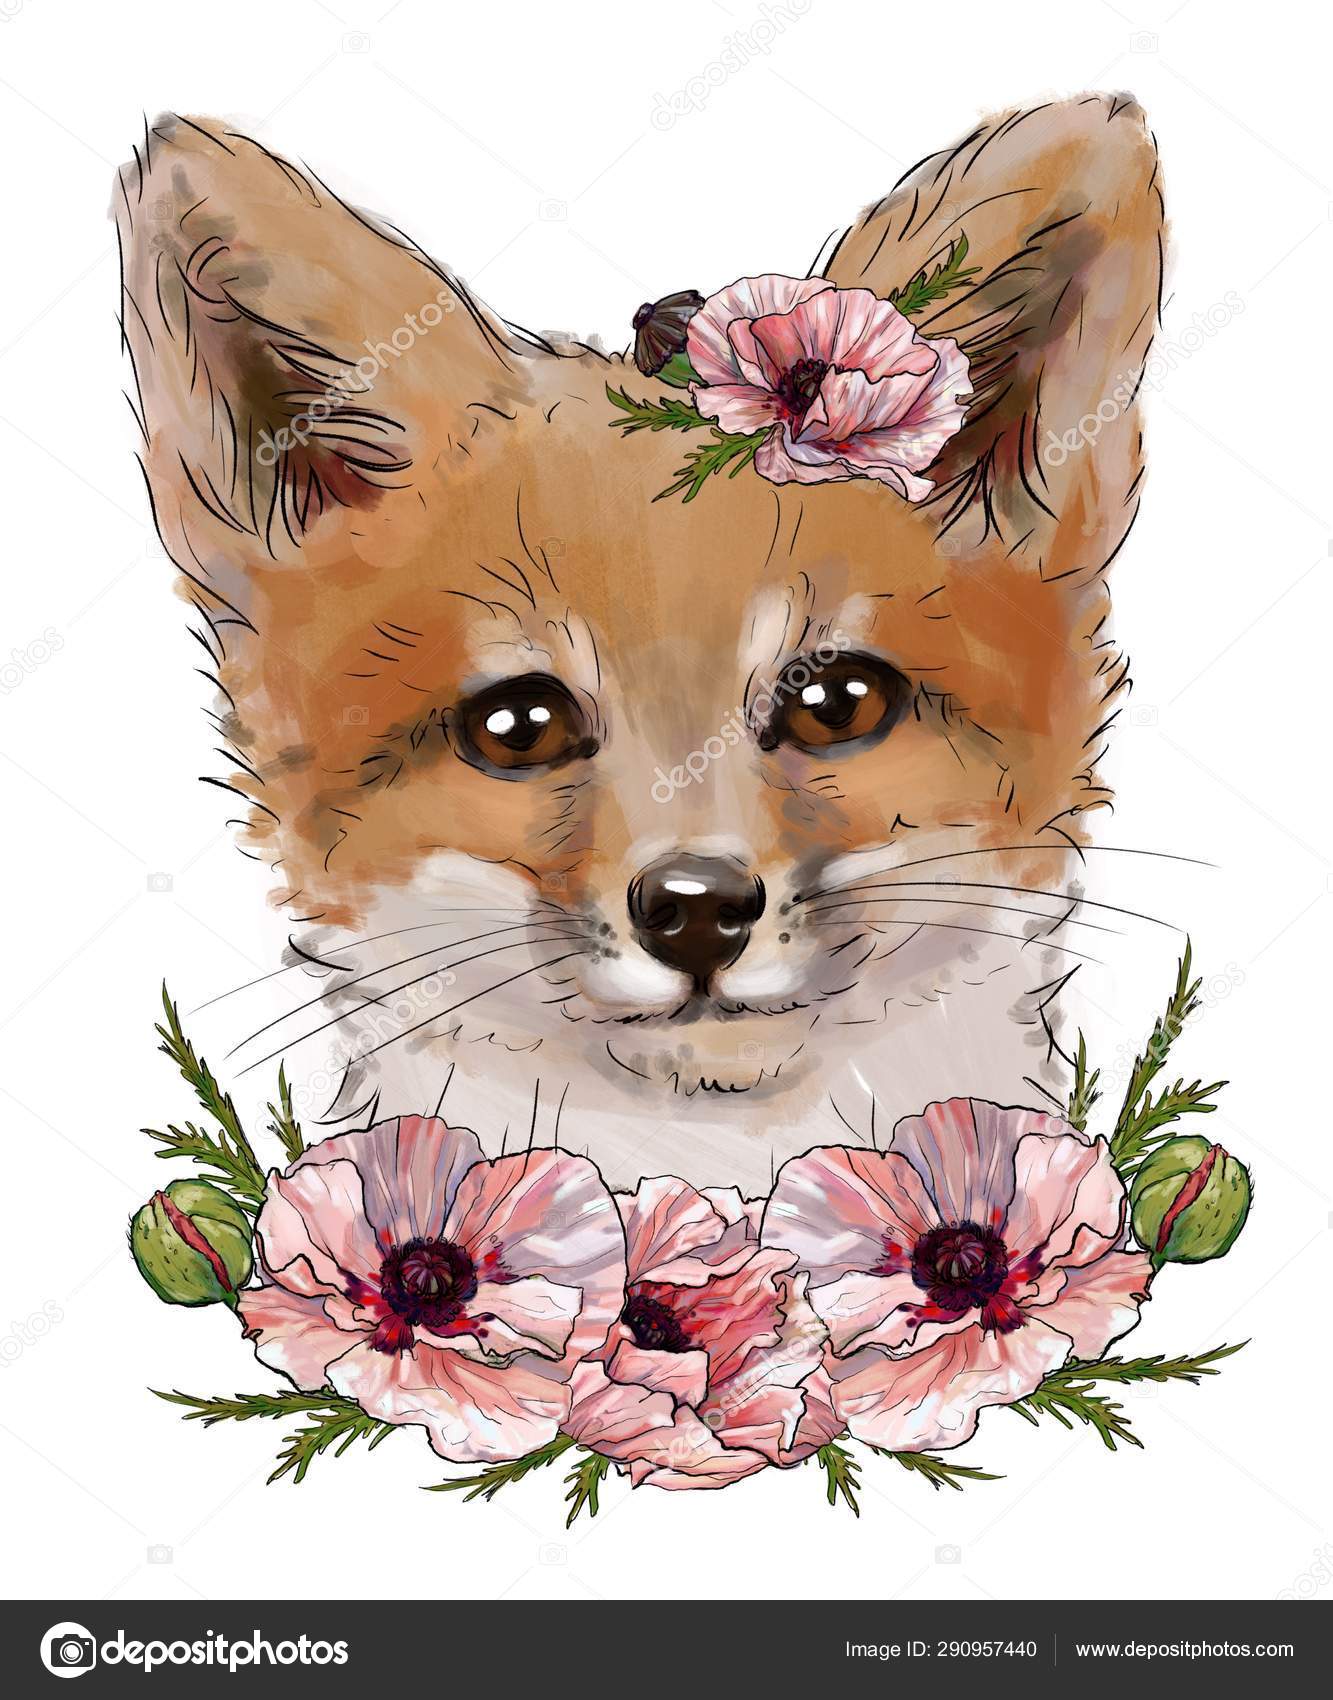 BEAUTIFUL RED FOX GLOSSY POSTER PICTURE PHOTO PRINT cute adorable wild 2081 